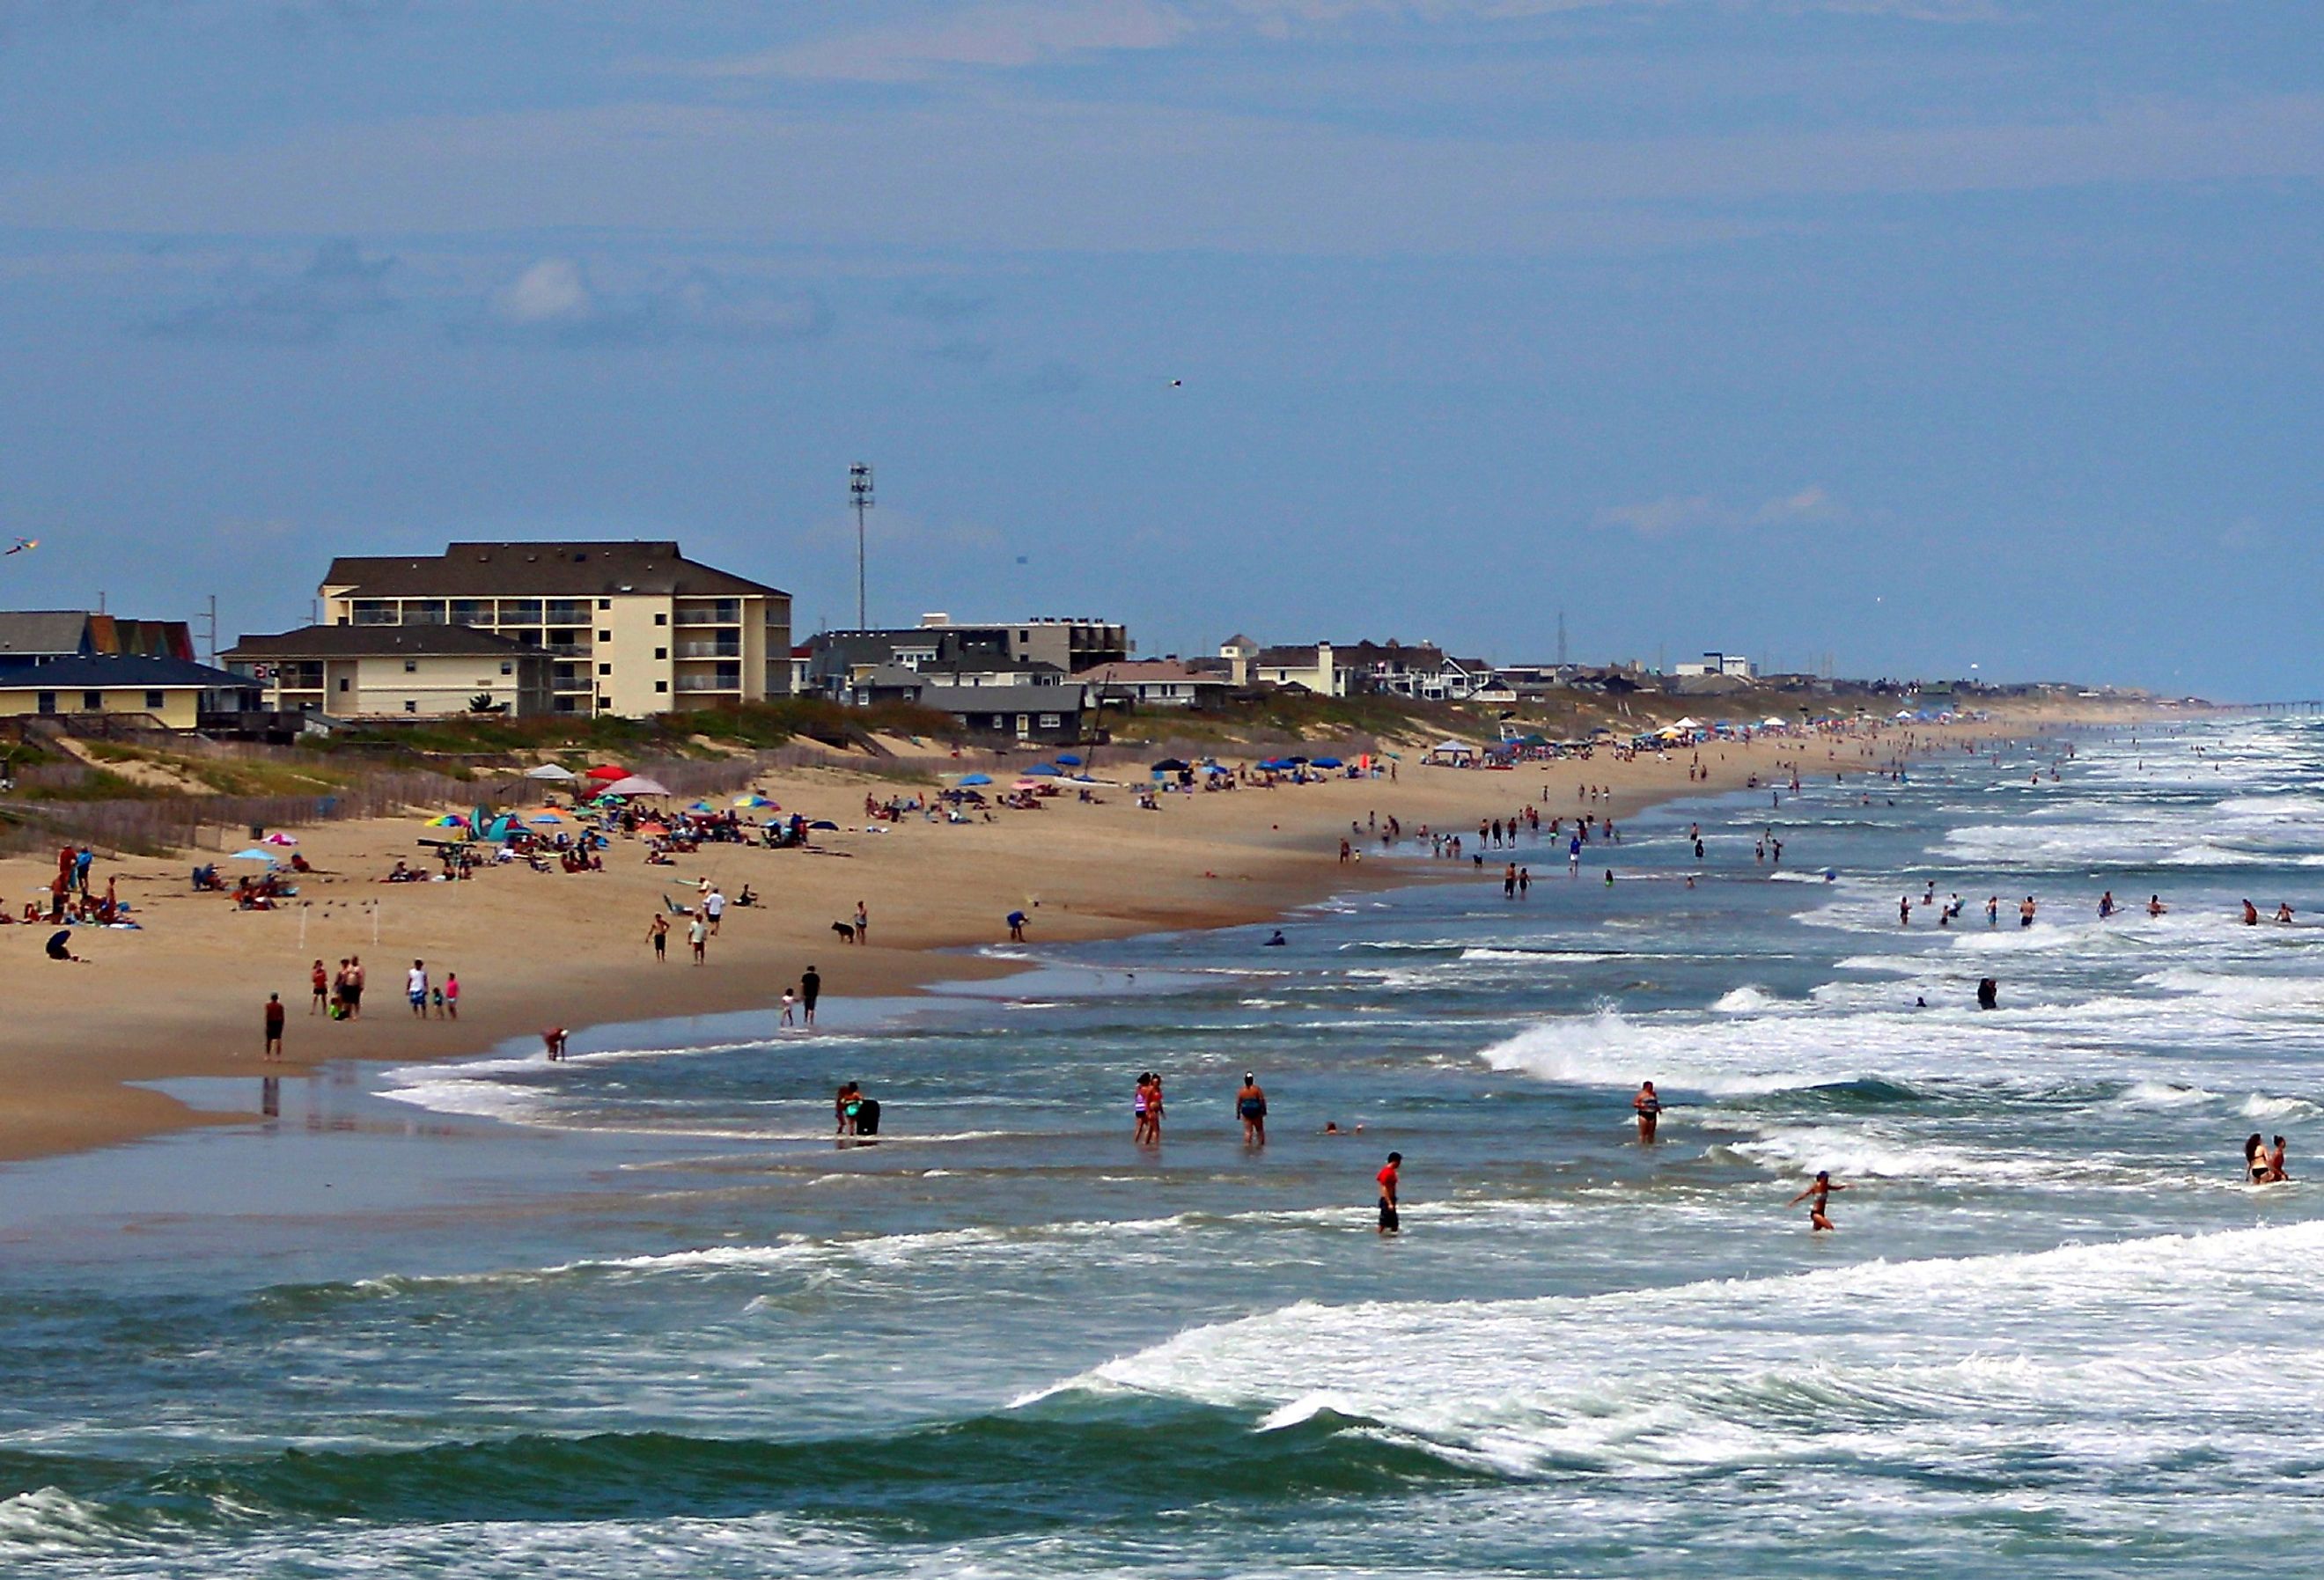 People on the beach and in the water at Nags Head Beach, Outer Banks.